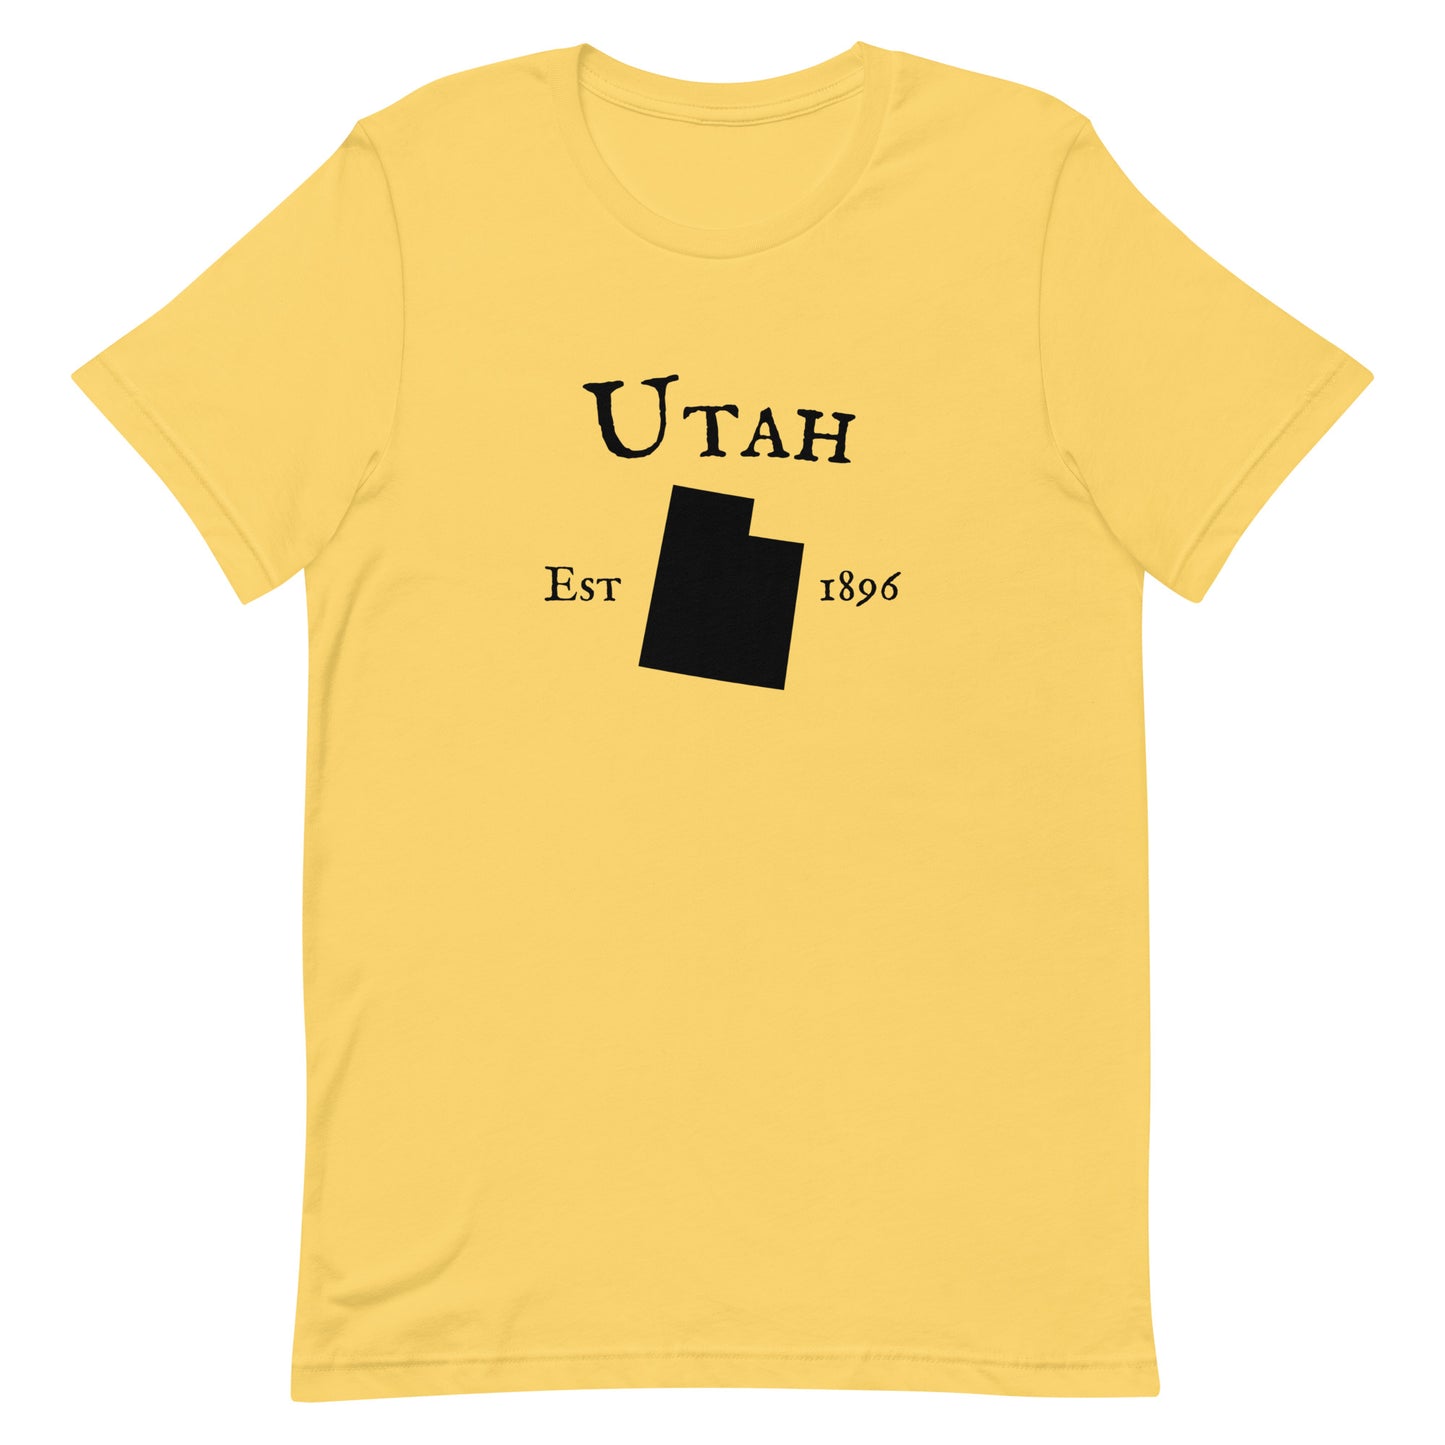 "Utah Established In 1896" T-Shirt - Weave Got Gifts - Unique Gifts You Won’t Find Anywhere Else!